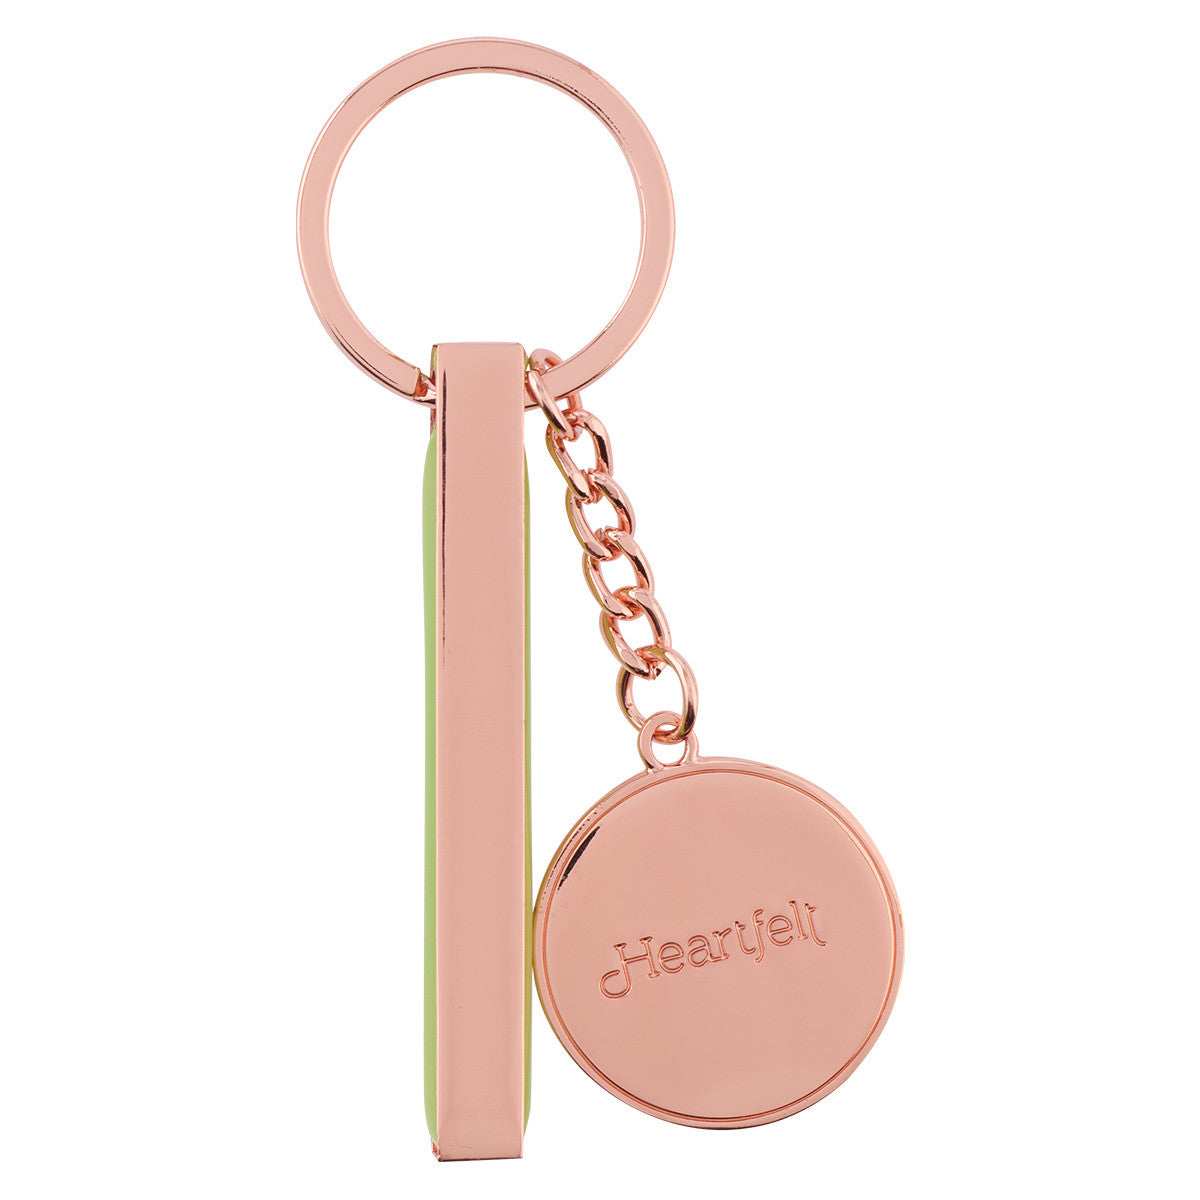 Life Is Beautiful Citrus Leaves Rose Gold Key Ring - The Christian Gift Company